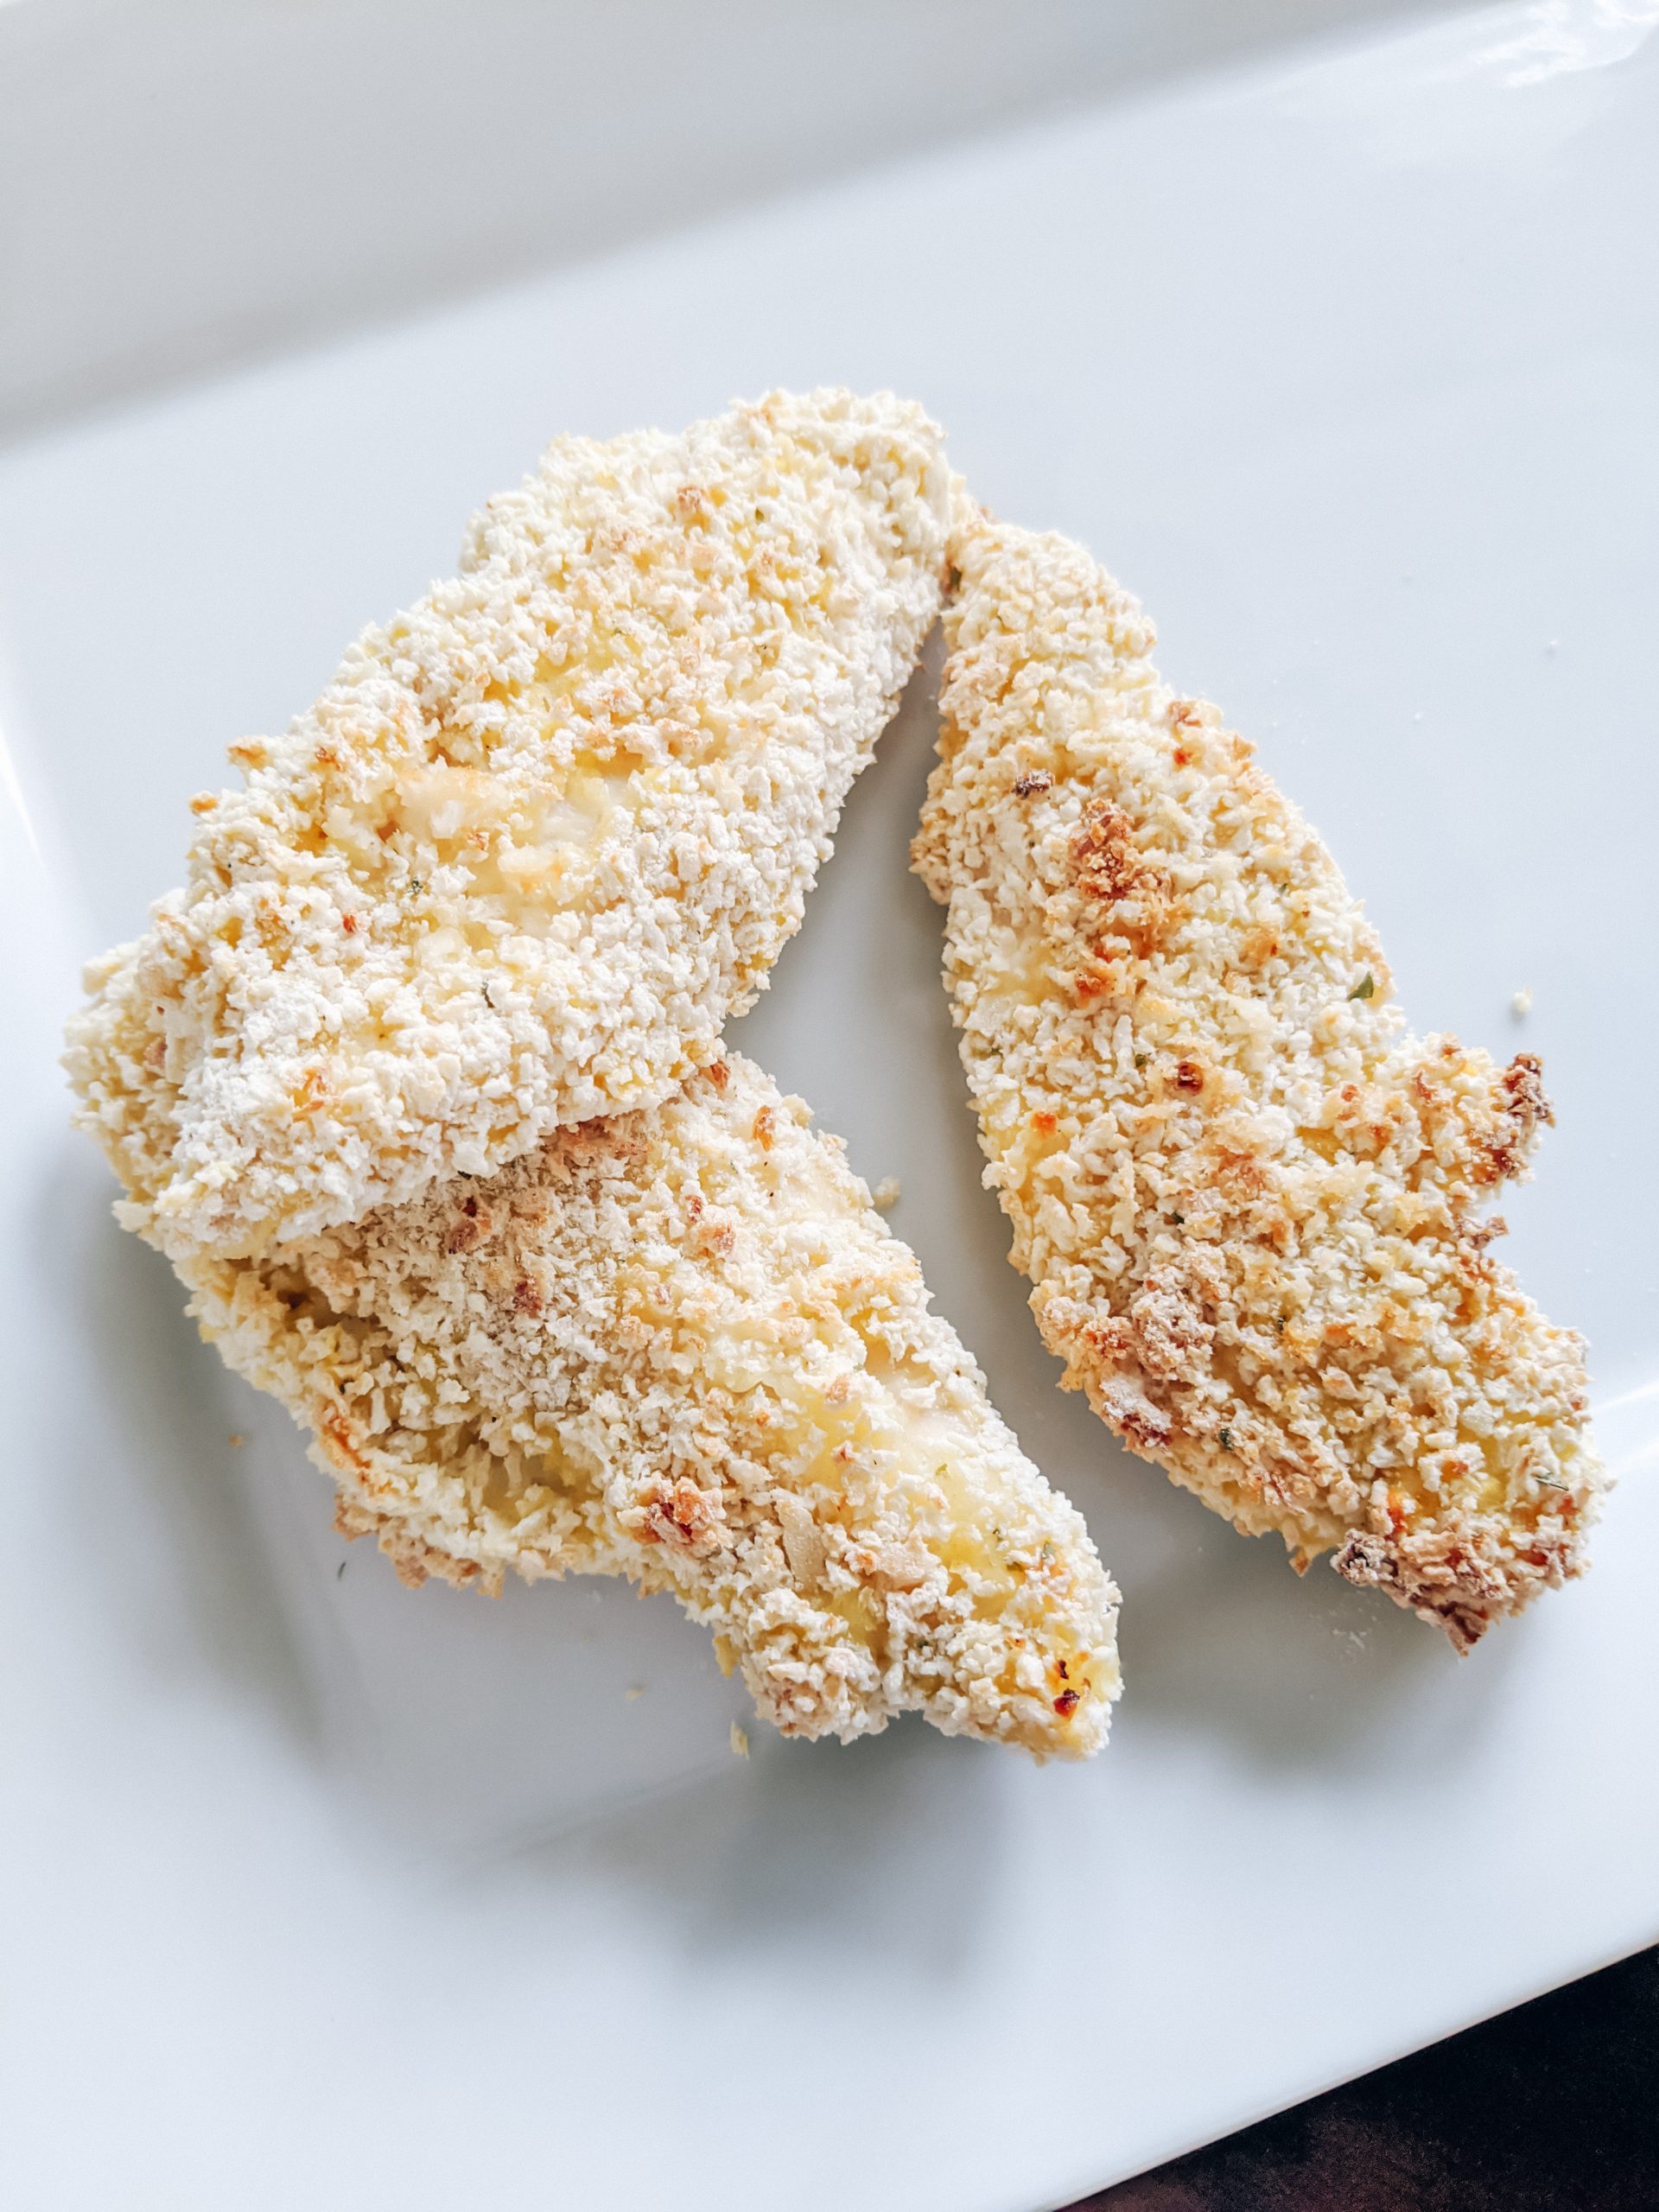 Baked Chicken Tenders with Crispy Panko Breading - This easy chicken tenders recipe with panko breading is a family favorite! The kids can even help prepare these! The panko breading makes them nice and crispy straight out of the oven, no need for frying. #chickenrecipes #chickentenders #kidfriendlyfoods